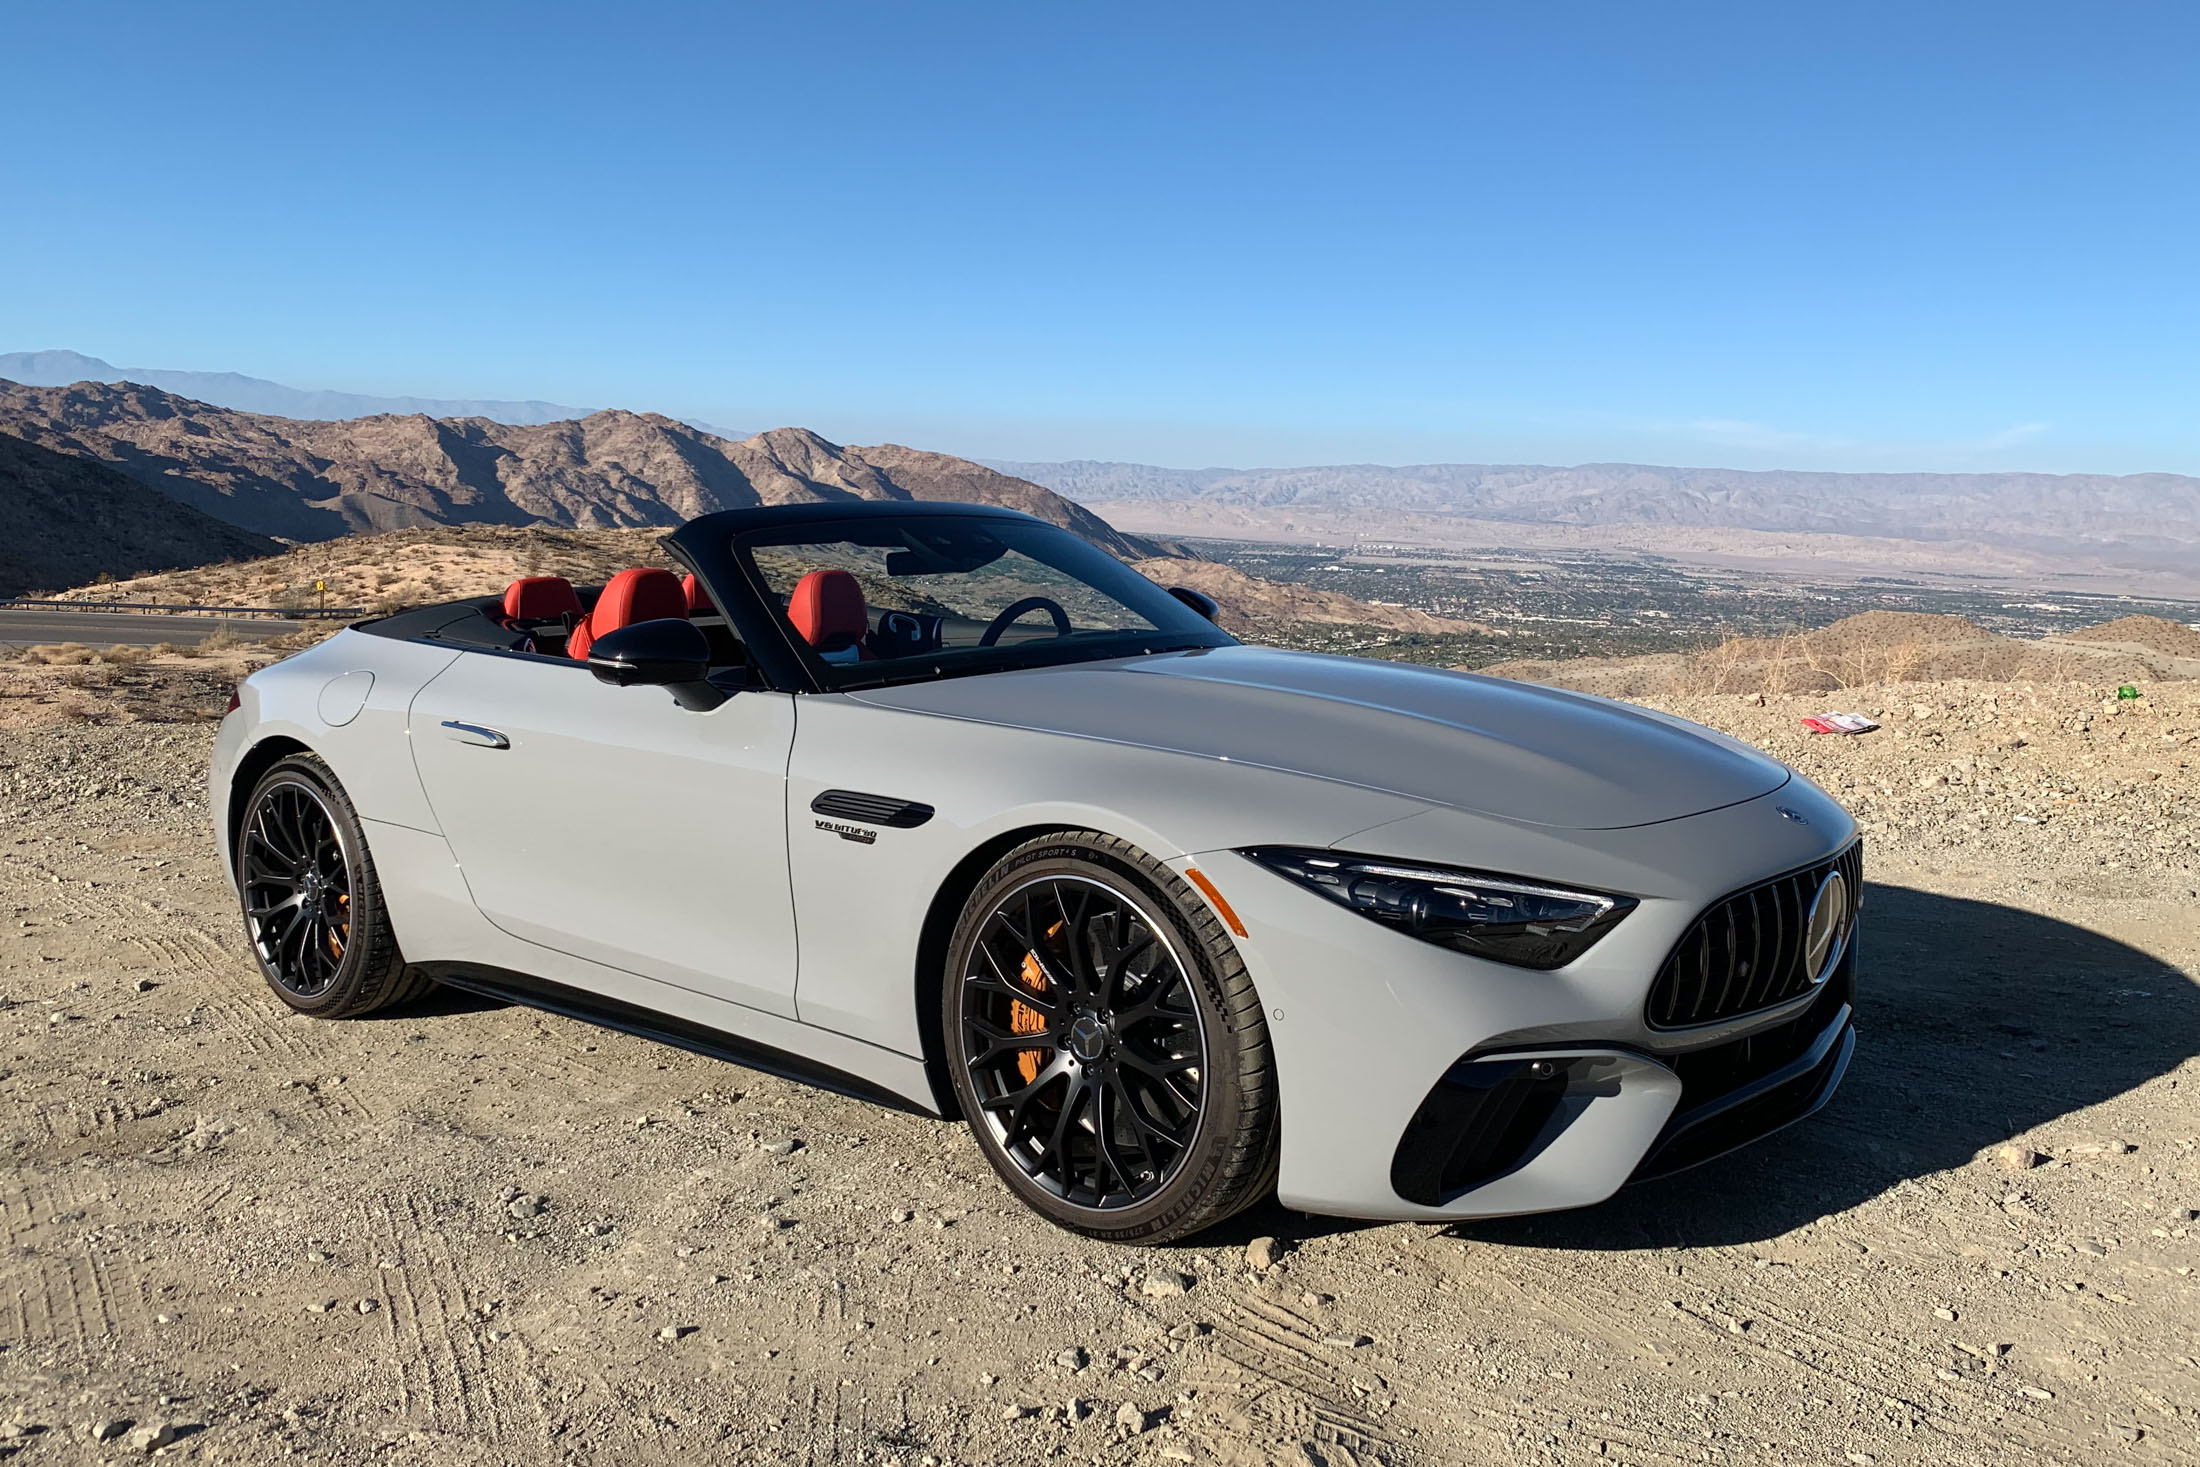 2022 MercedesBenz AMG SL 63 Review Drives Nothing Like the Originals